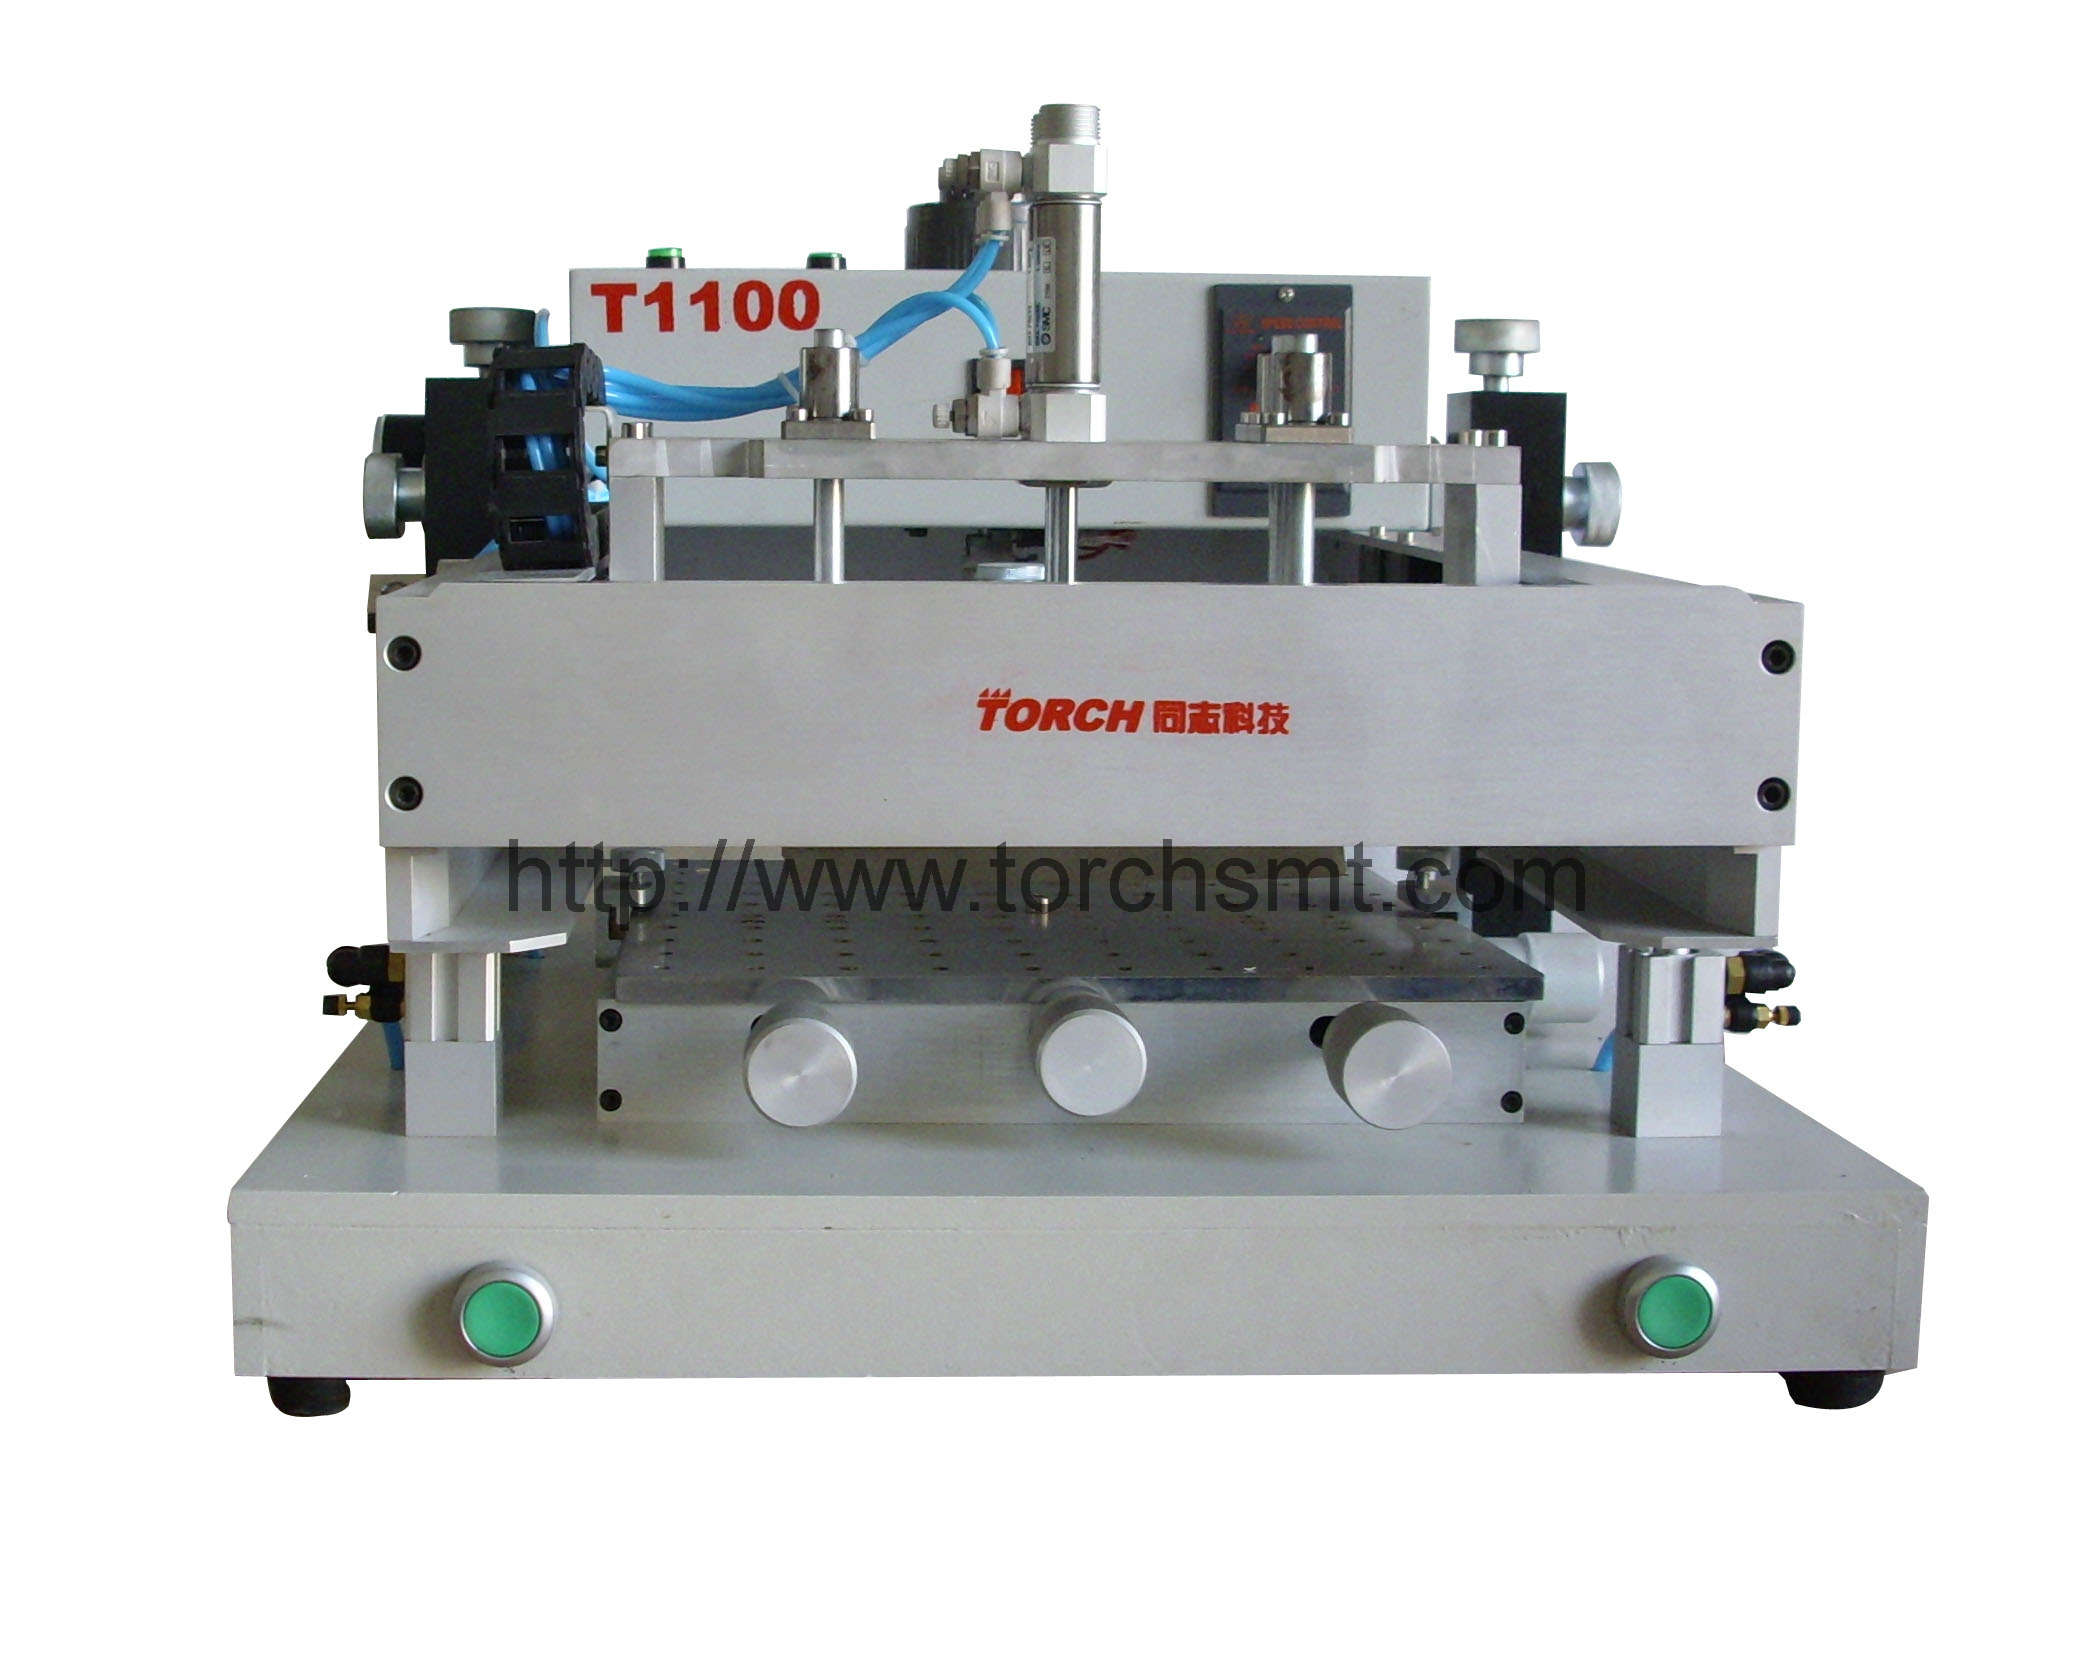 Bench-top high accuracy semiautomatic printing machine T1100